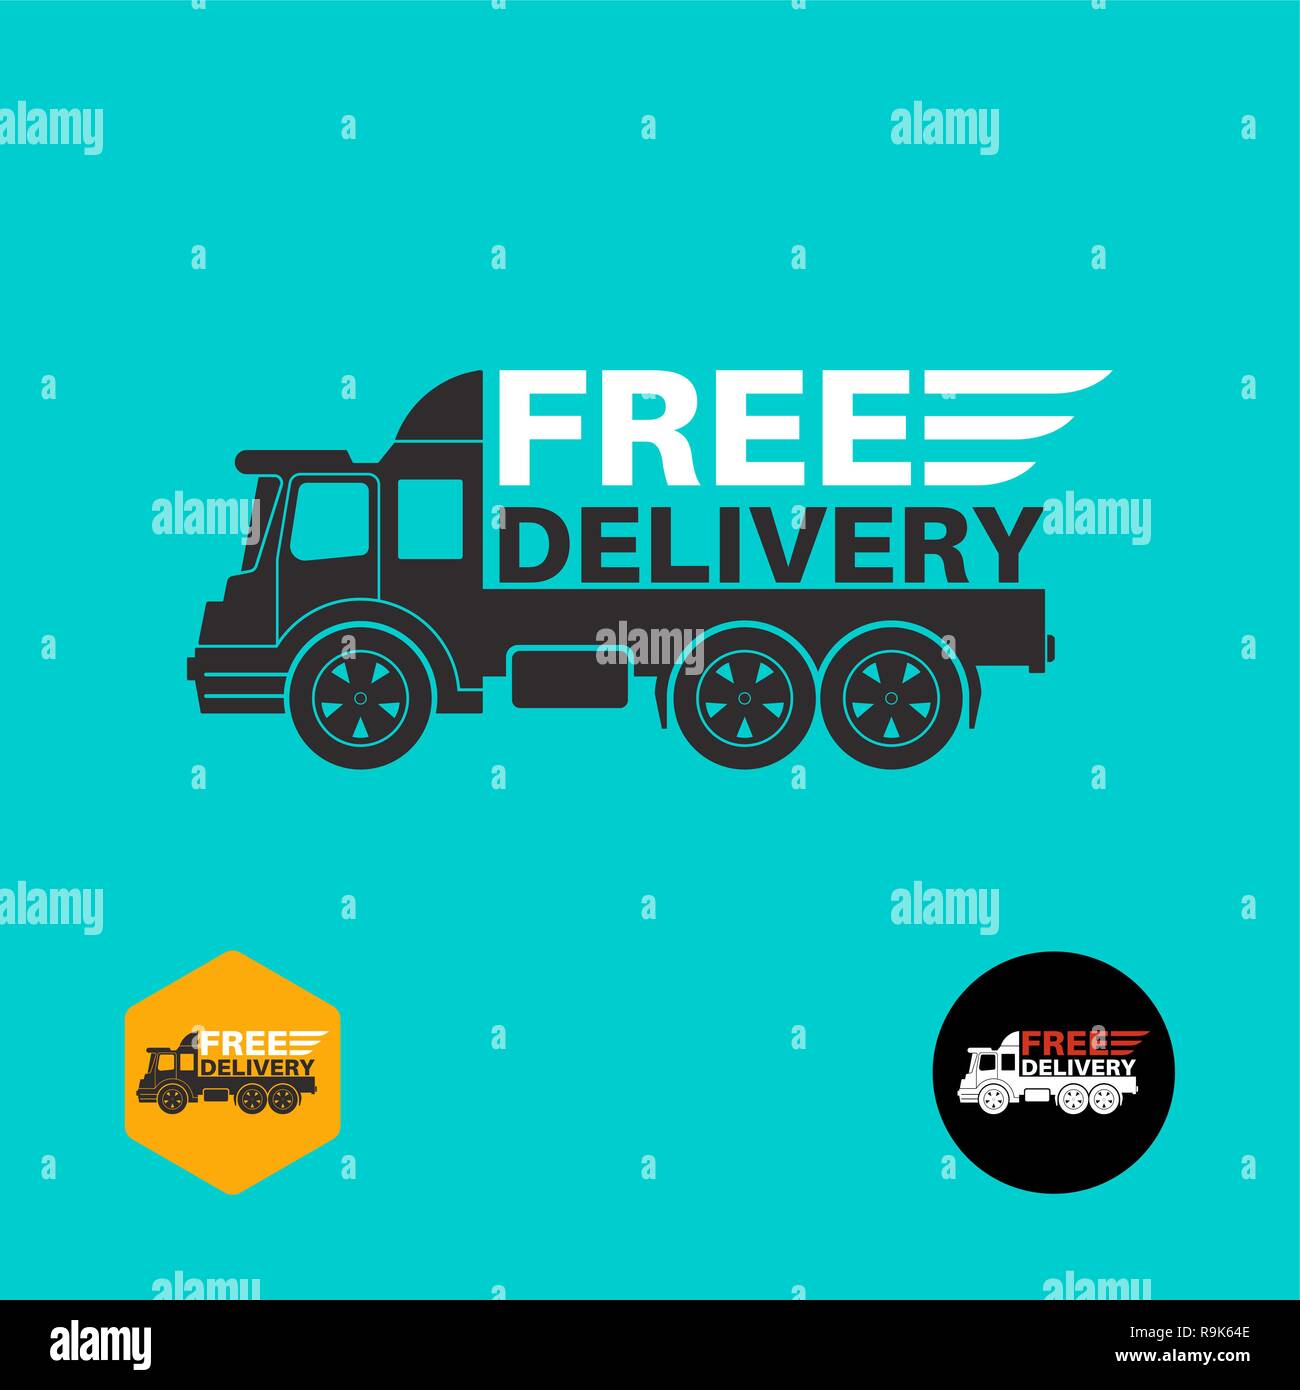 Free delivery icon. Round the clock shipment concept. Design can be used as a poster, advertising, singboard. Vector element of graphic design Stock Vector